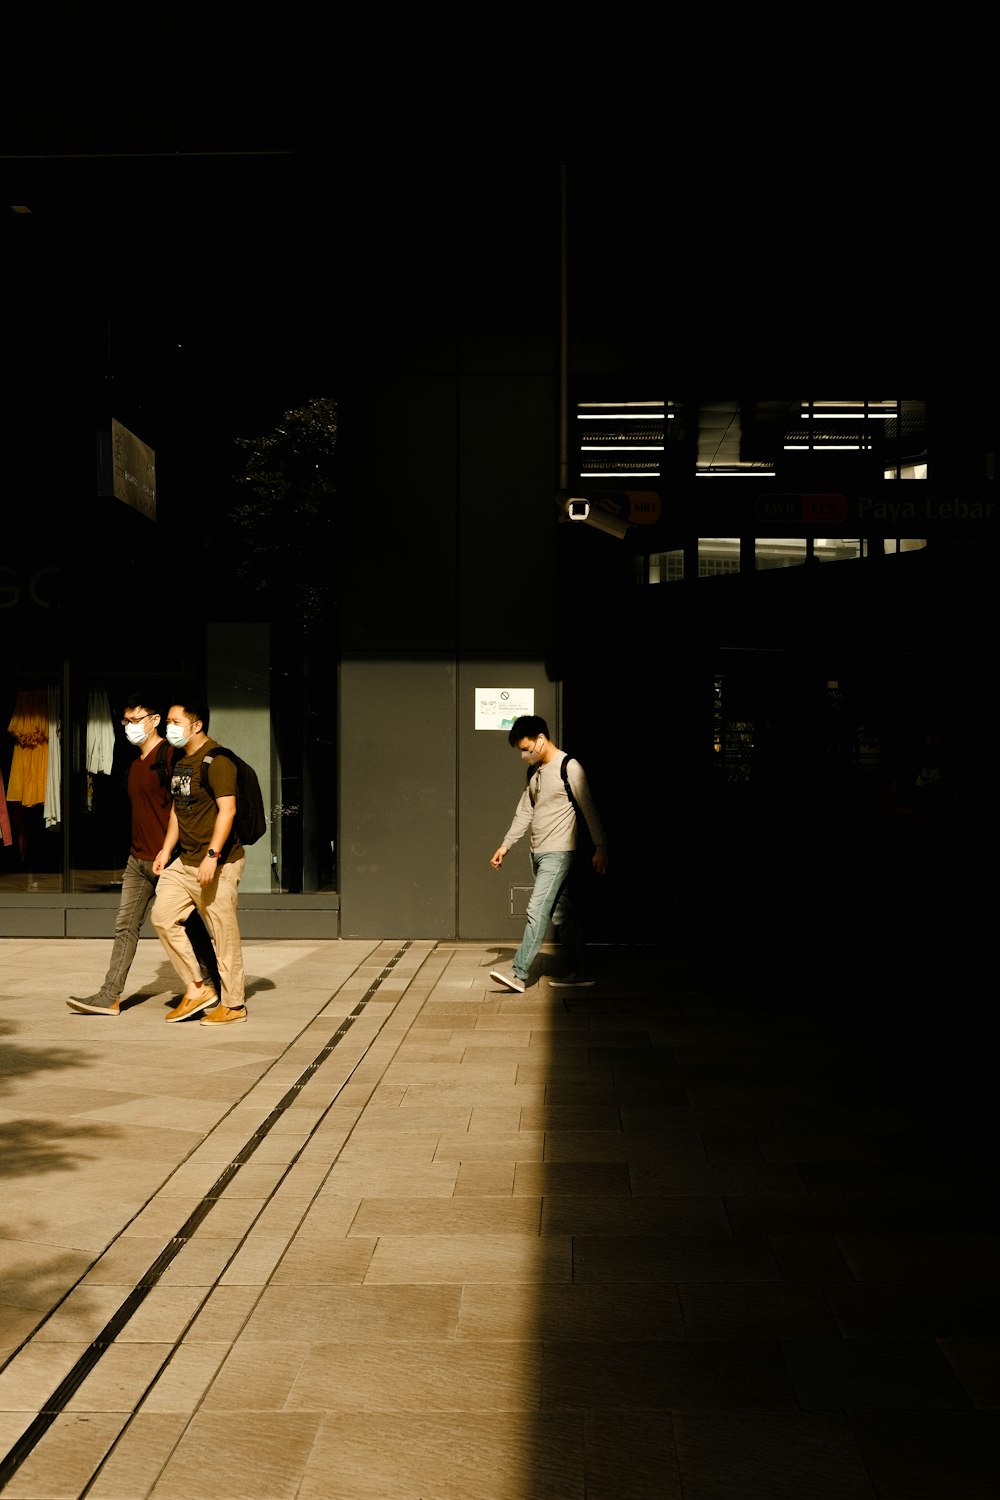 a group of people walking on a sidewalk at night